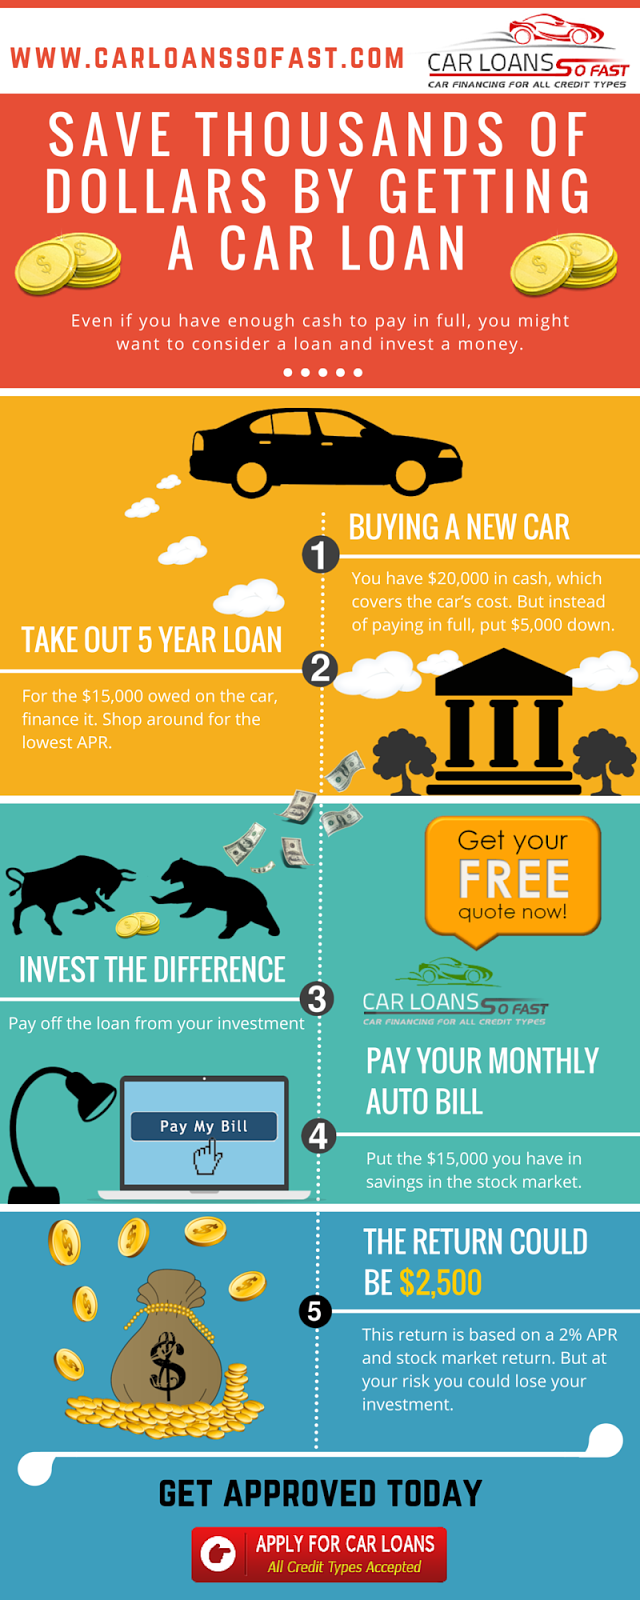 How Can You Save Money By Getting a Car Loan?